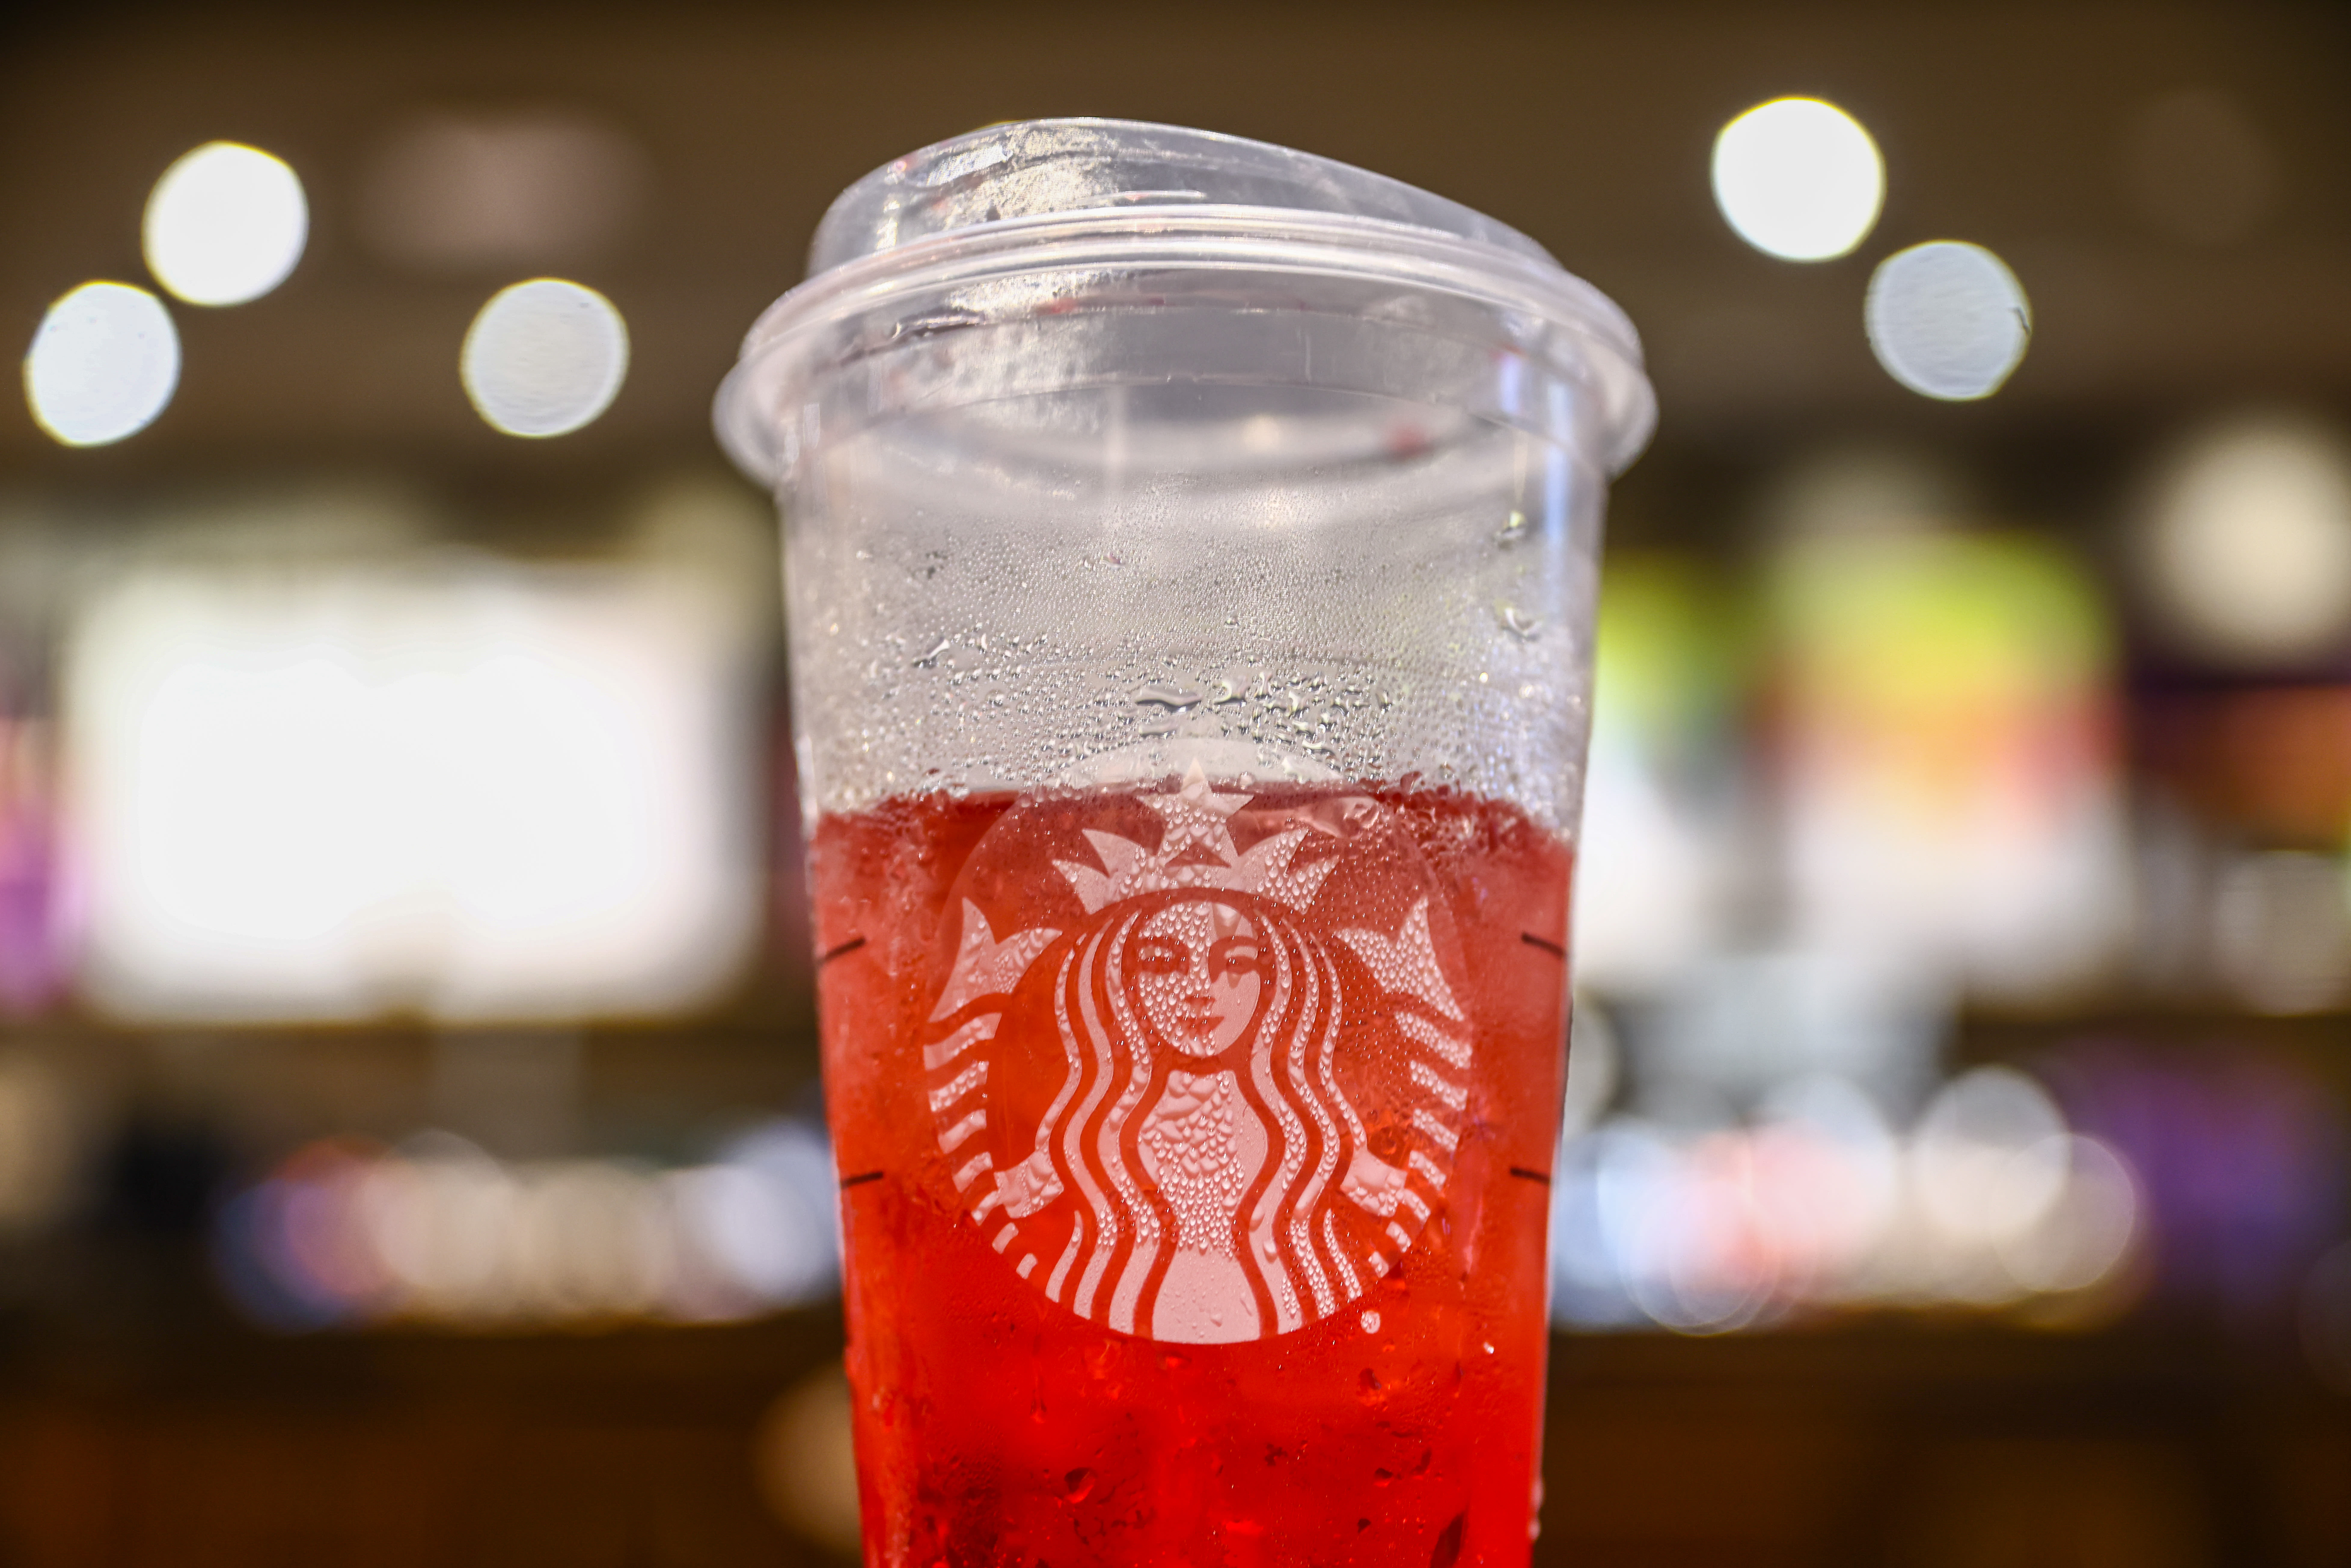 Starbucks expected to report weak sales as it pushes popping pearls and value plays